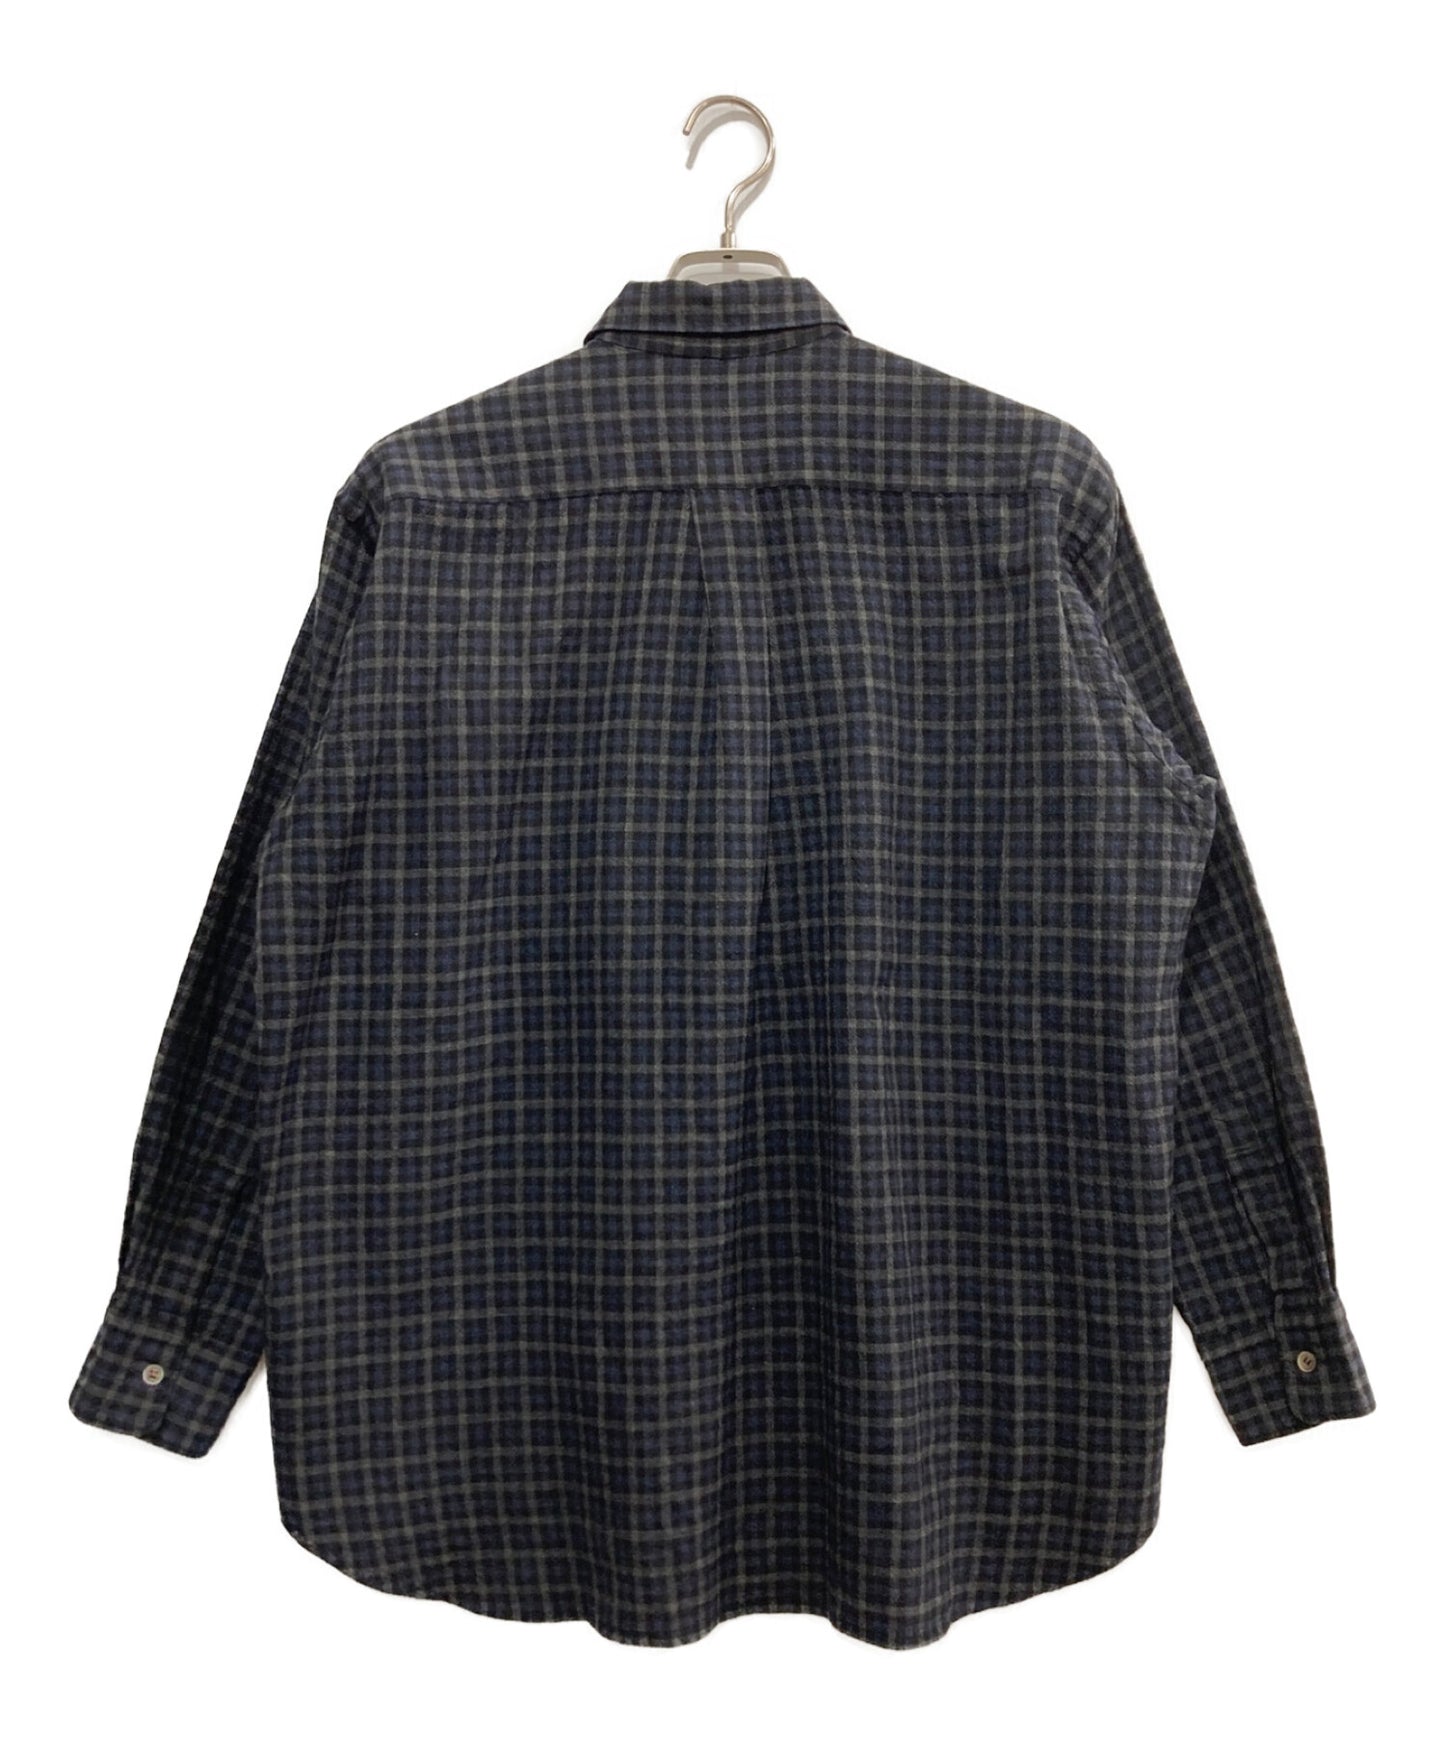 [Pre-owned] COMME des GARCONS HOMME Wool Check Shirt / HB-040590 / Tanaka Om / 1999 / AD1999 HB-040590